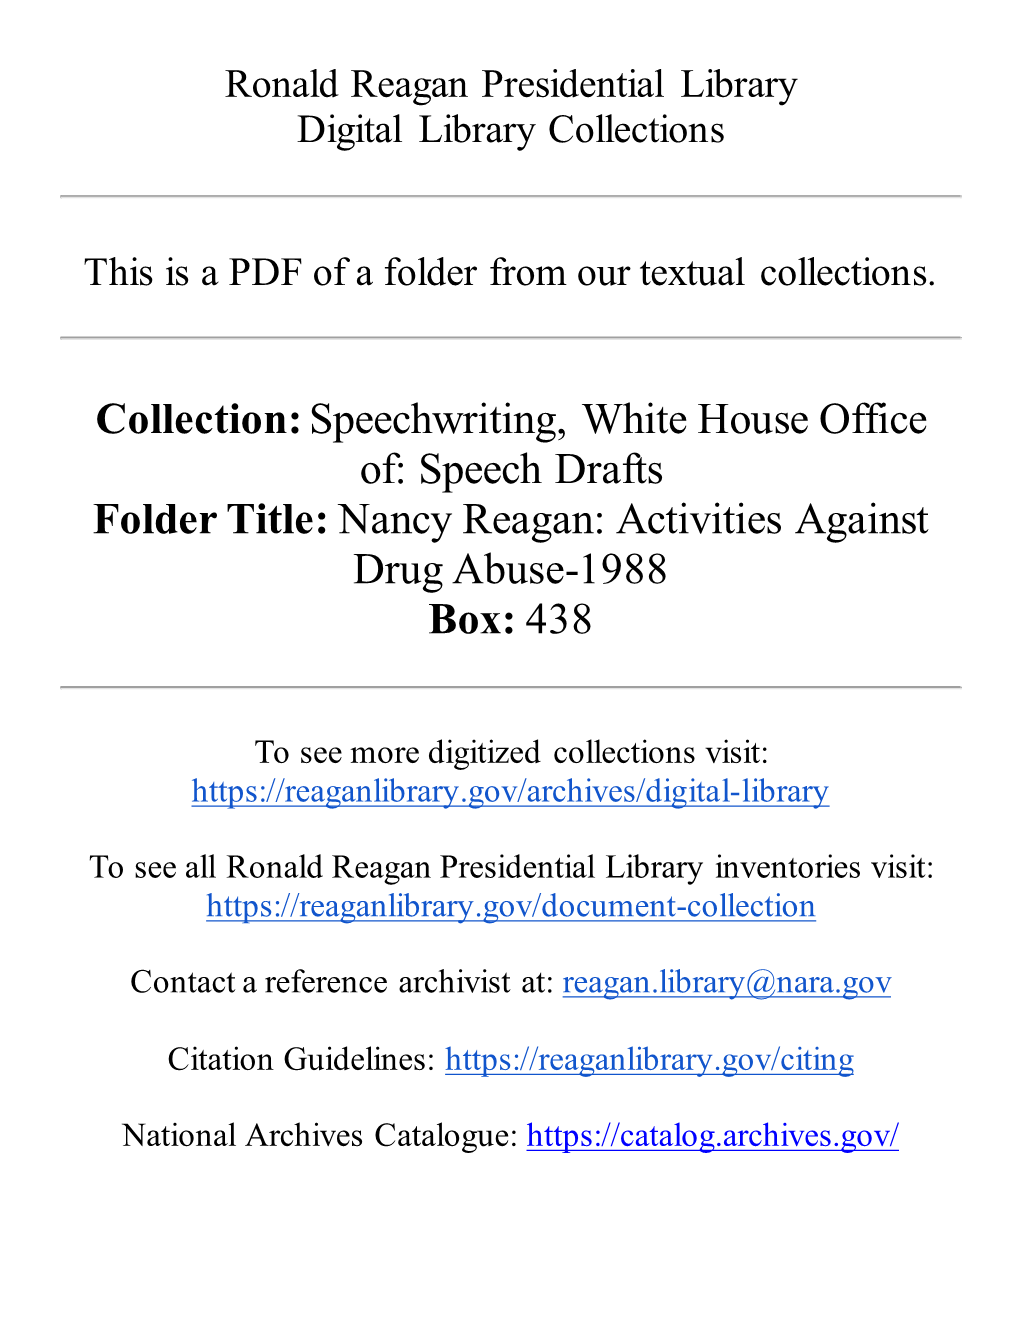 Collection: Speechwriting, White House Office Of: Speech Drafts Folder Title: Nancy Reagan: Activities Against Drug Abuse-1988 Box: 438